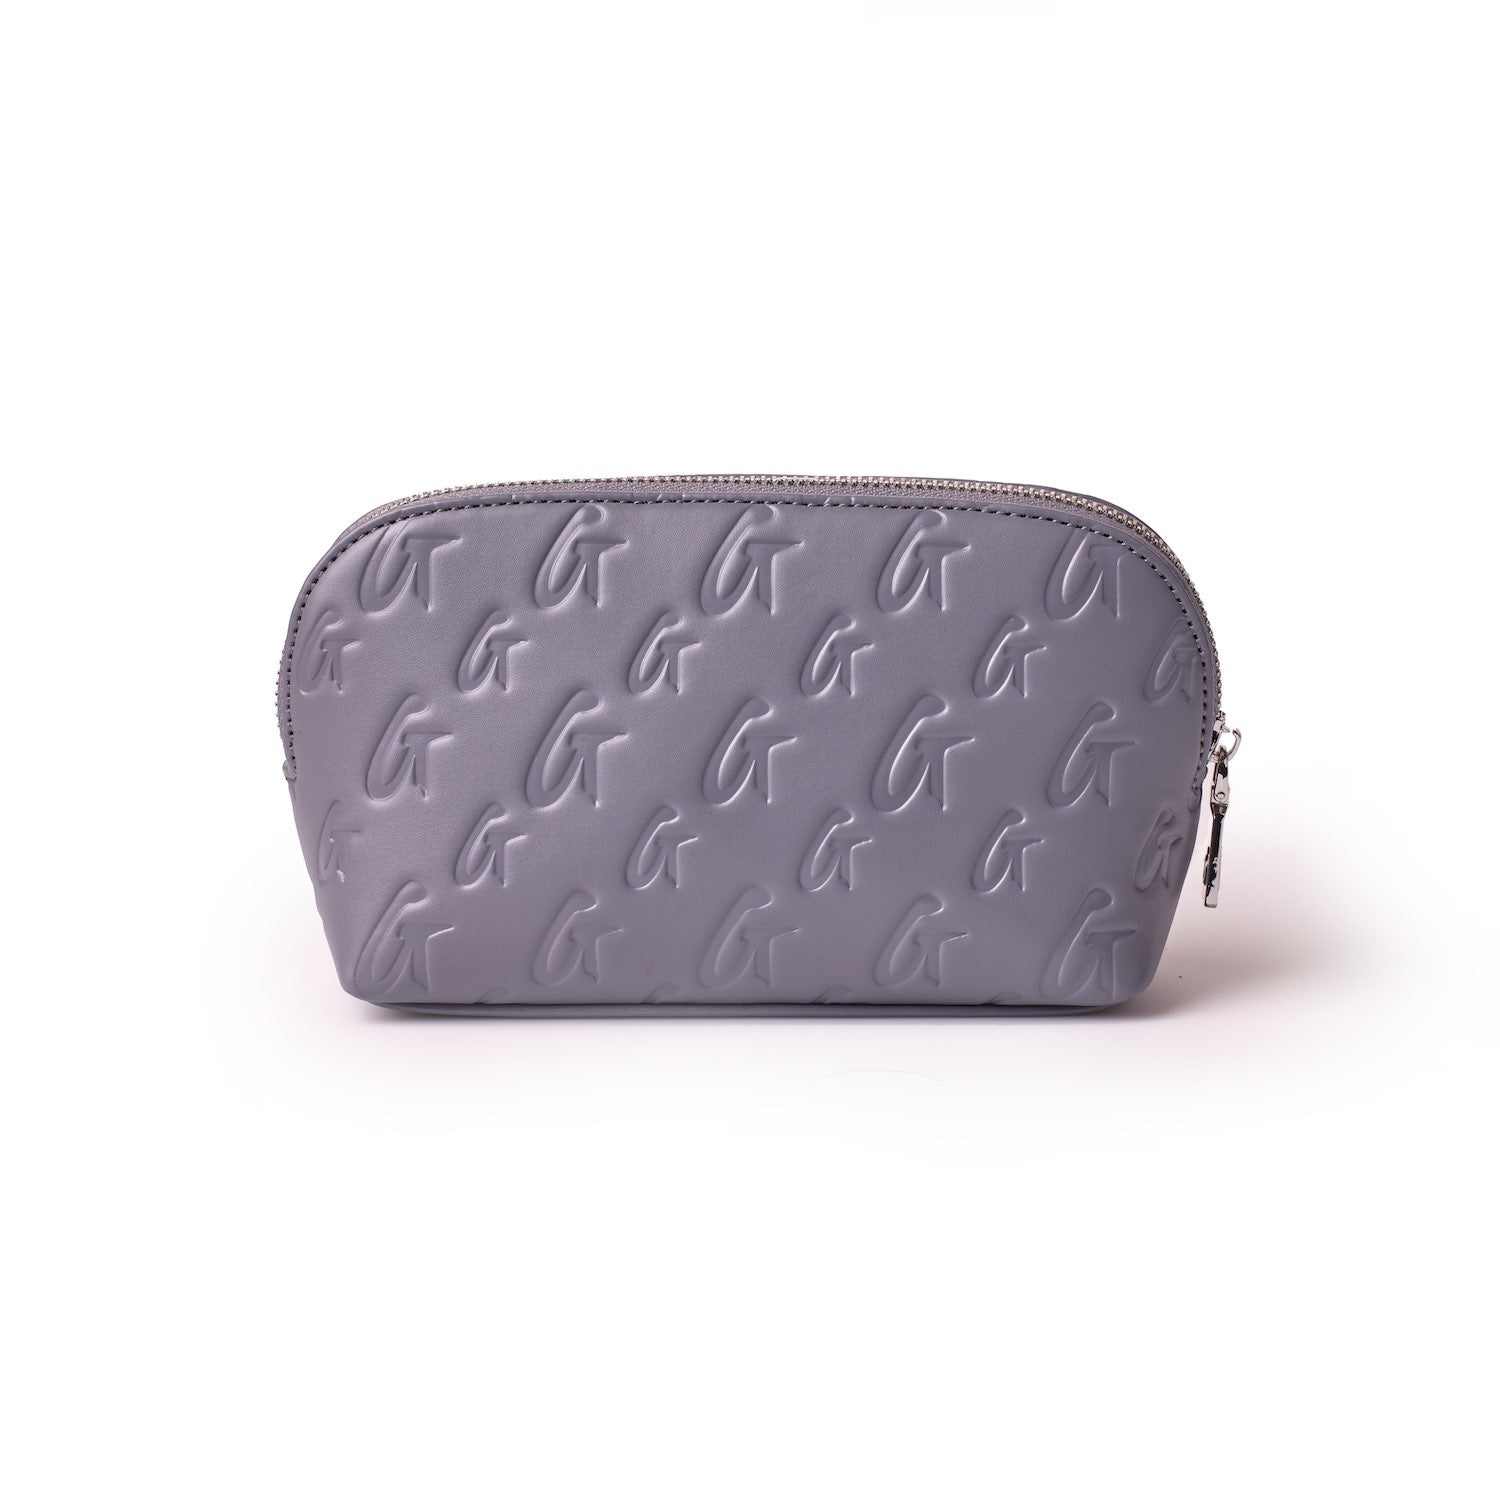 MONOGRAM COSMETIC POUCH GRAY